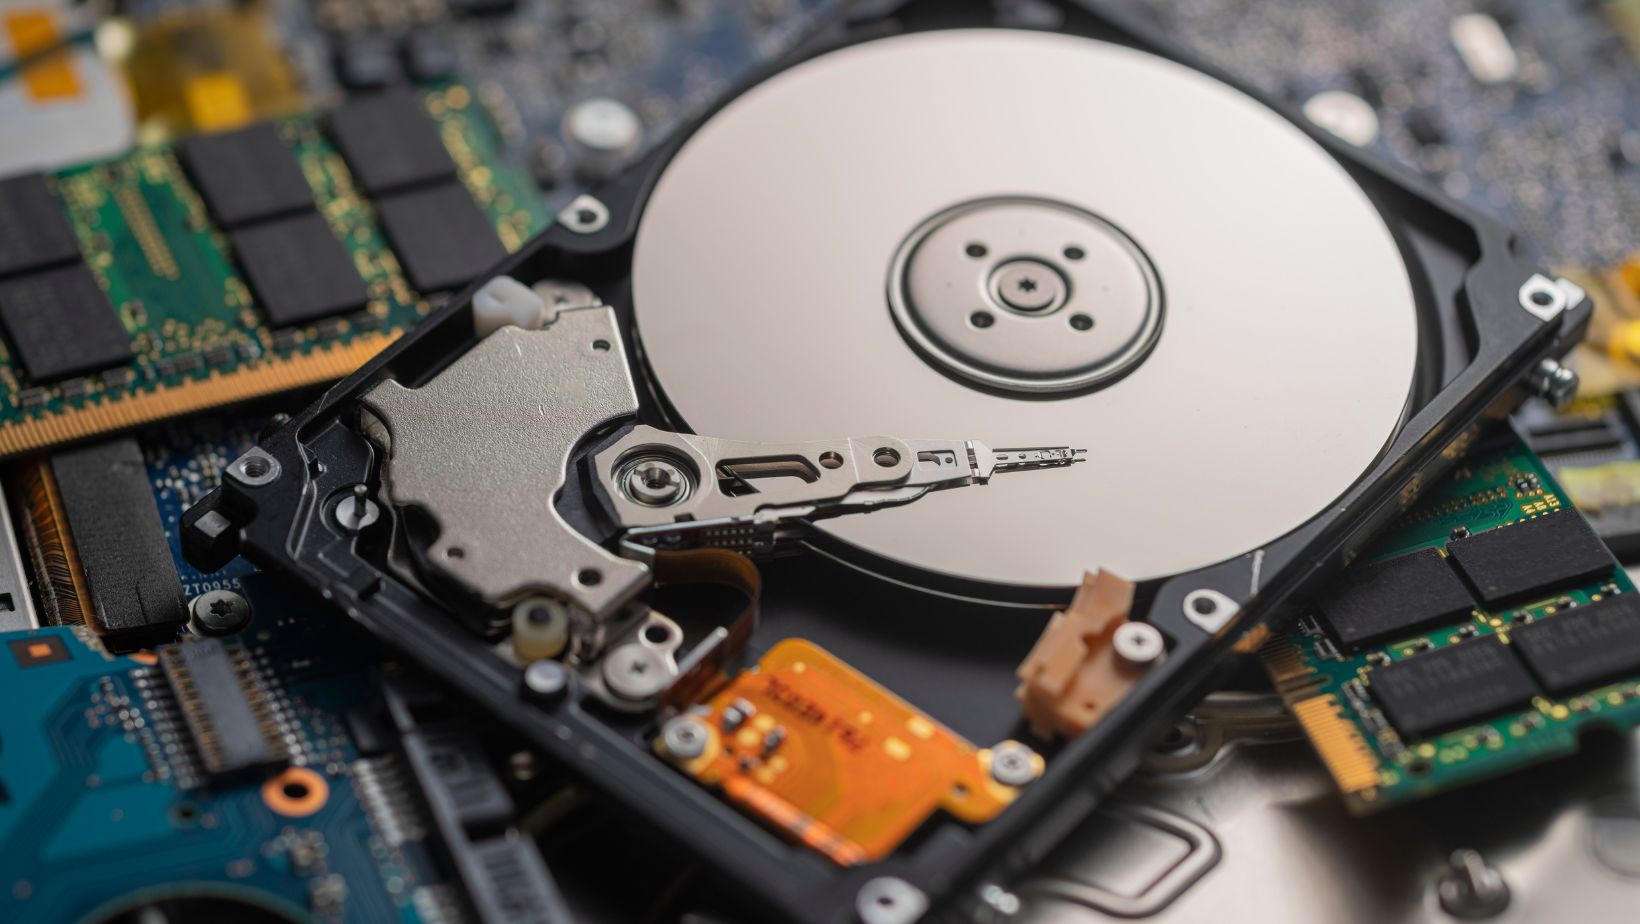 Why You Should Choose Hard Drive Shredding Over Simple Deletion